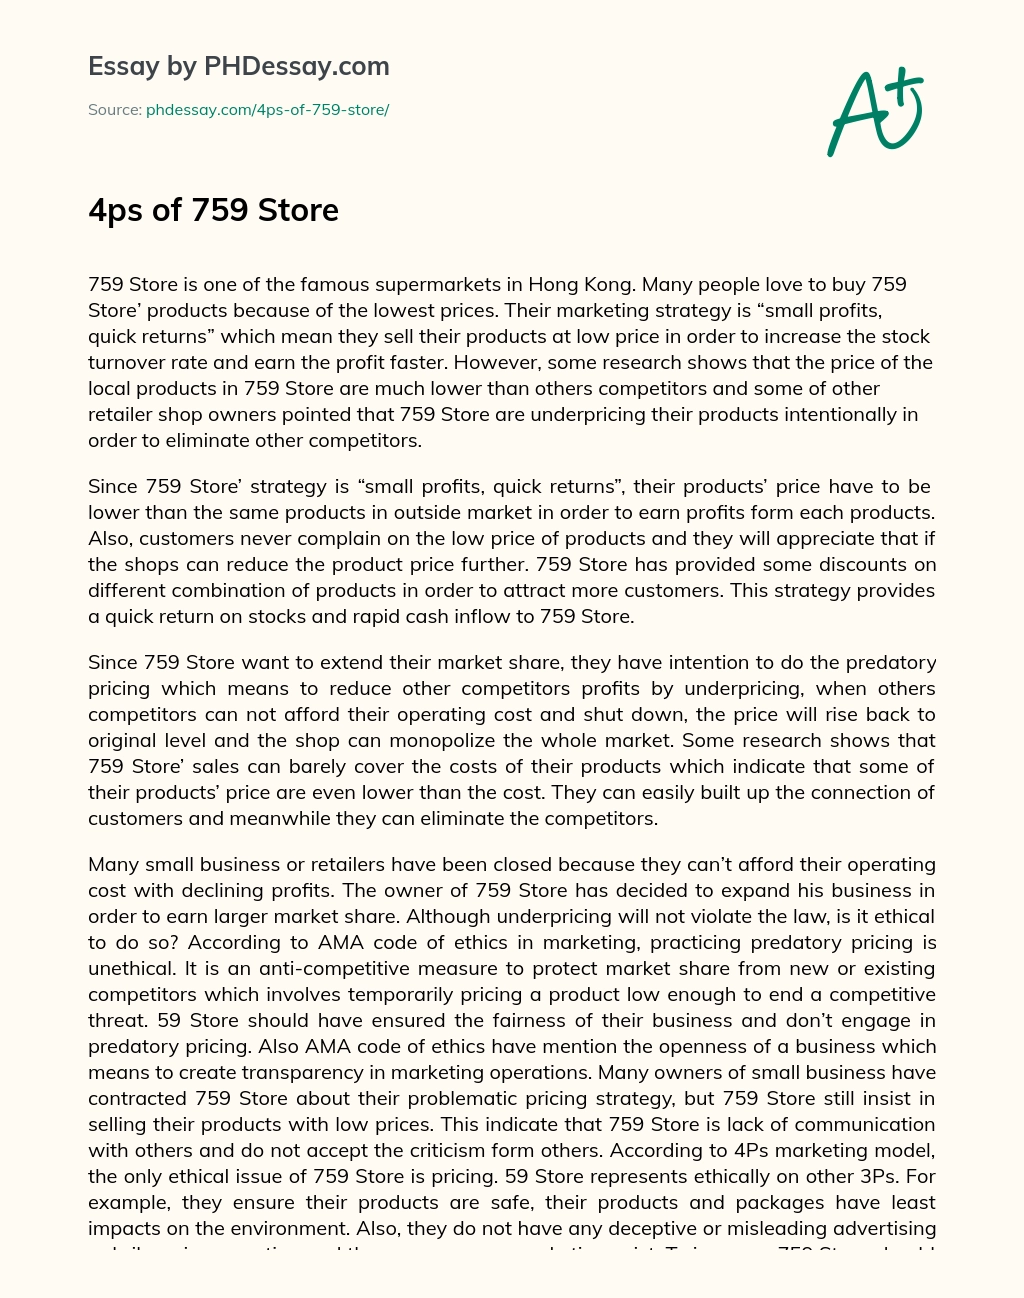 4ps of 759 Store essay